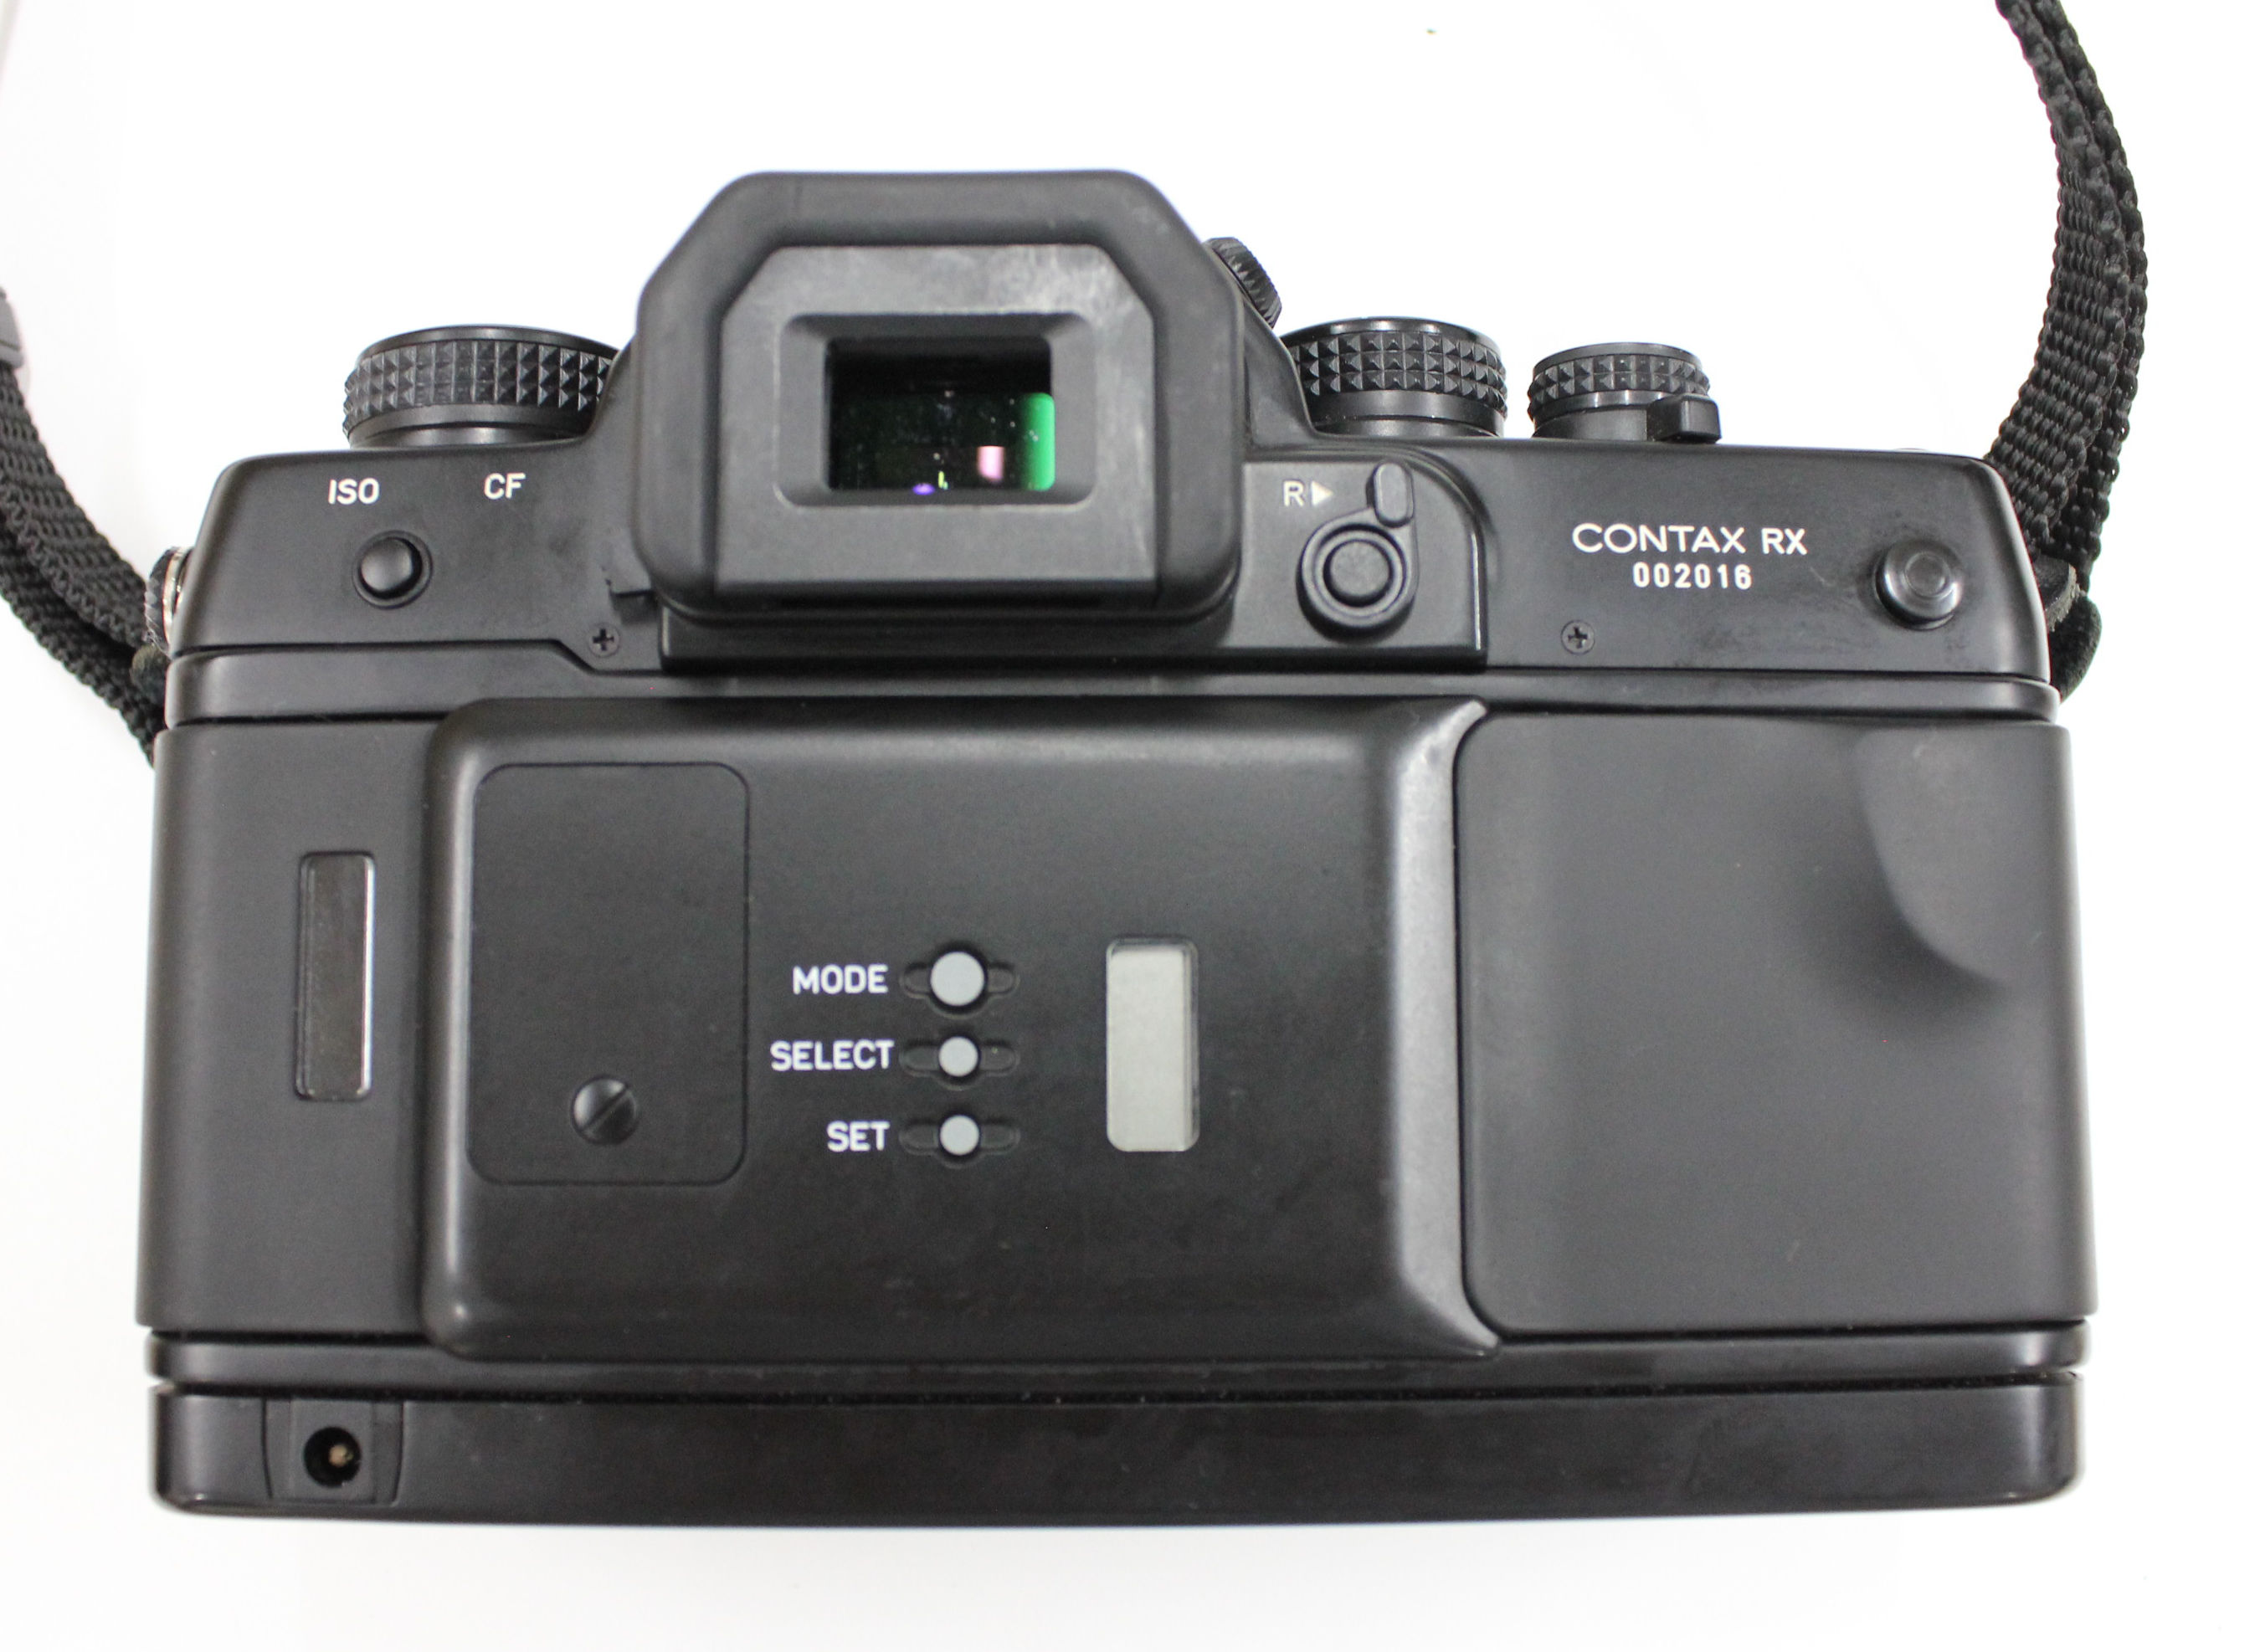  Contax RX 35mm SLR Film Camera Black Body from Japan Photo 3